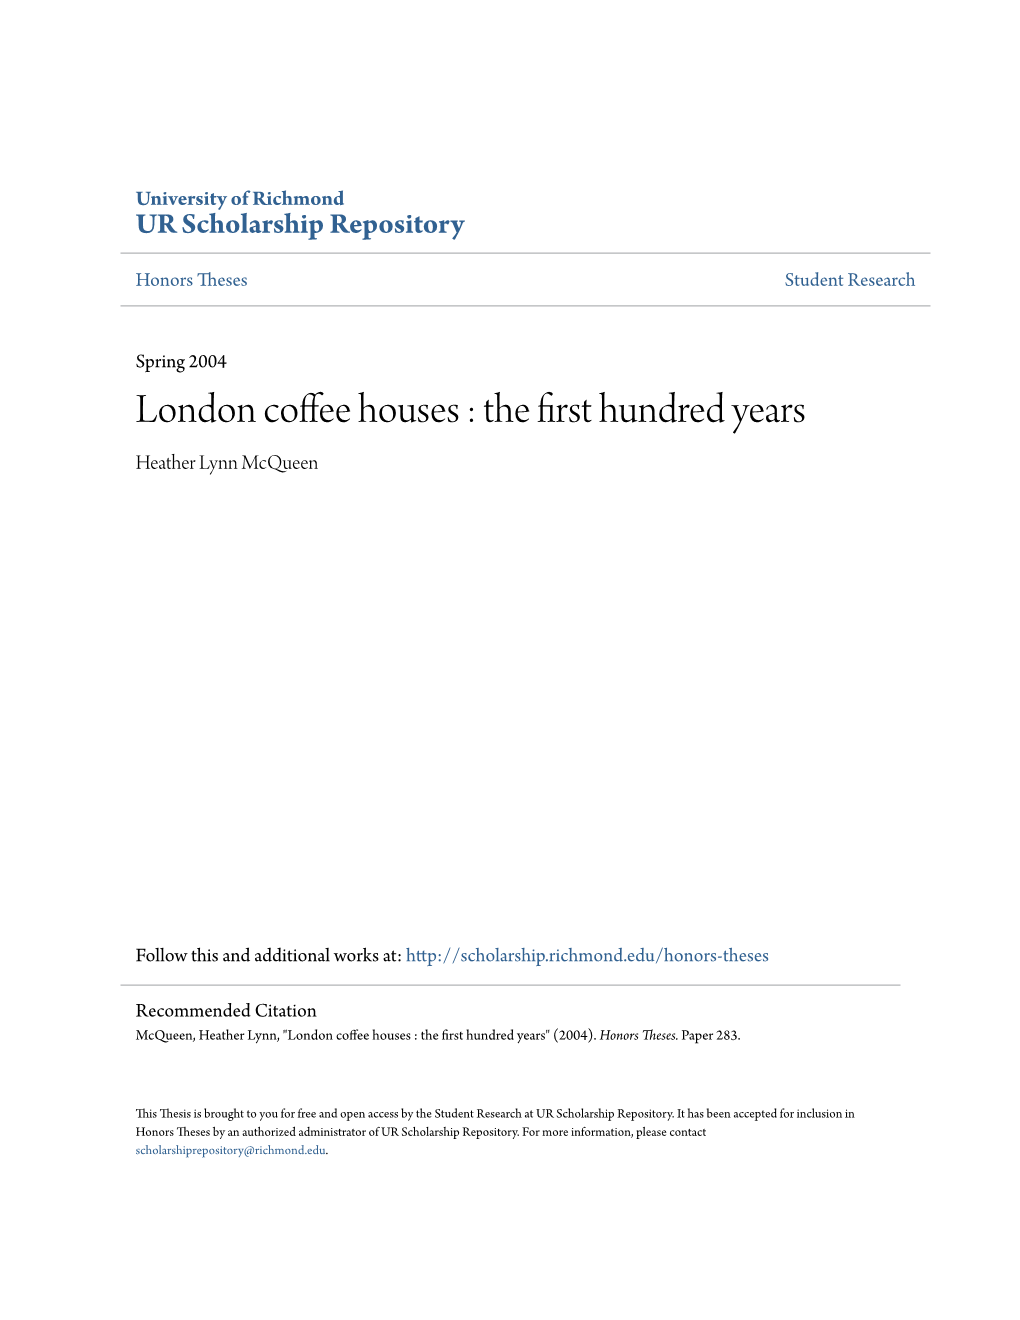 London Coffee Houses : the First Hundred Years Heather Lynn Mcqueen